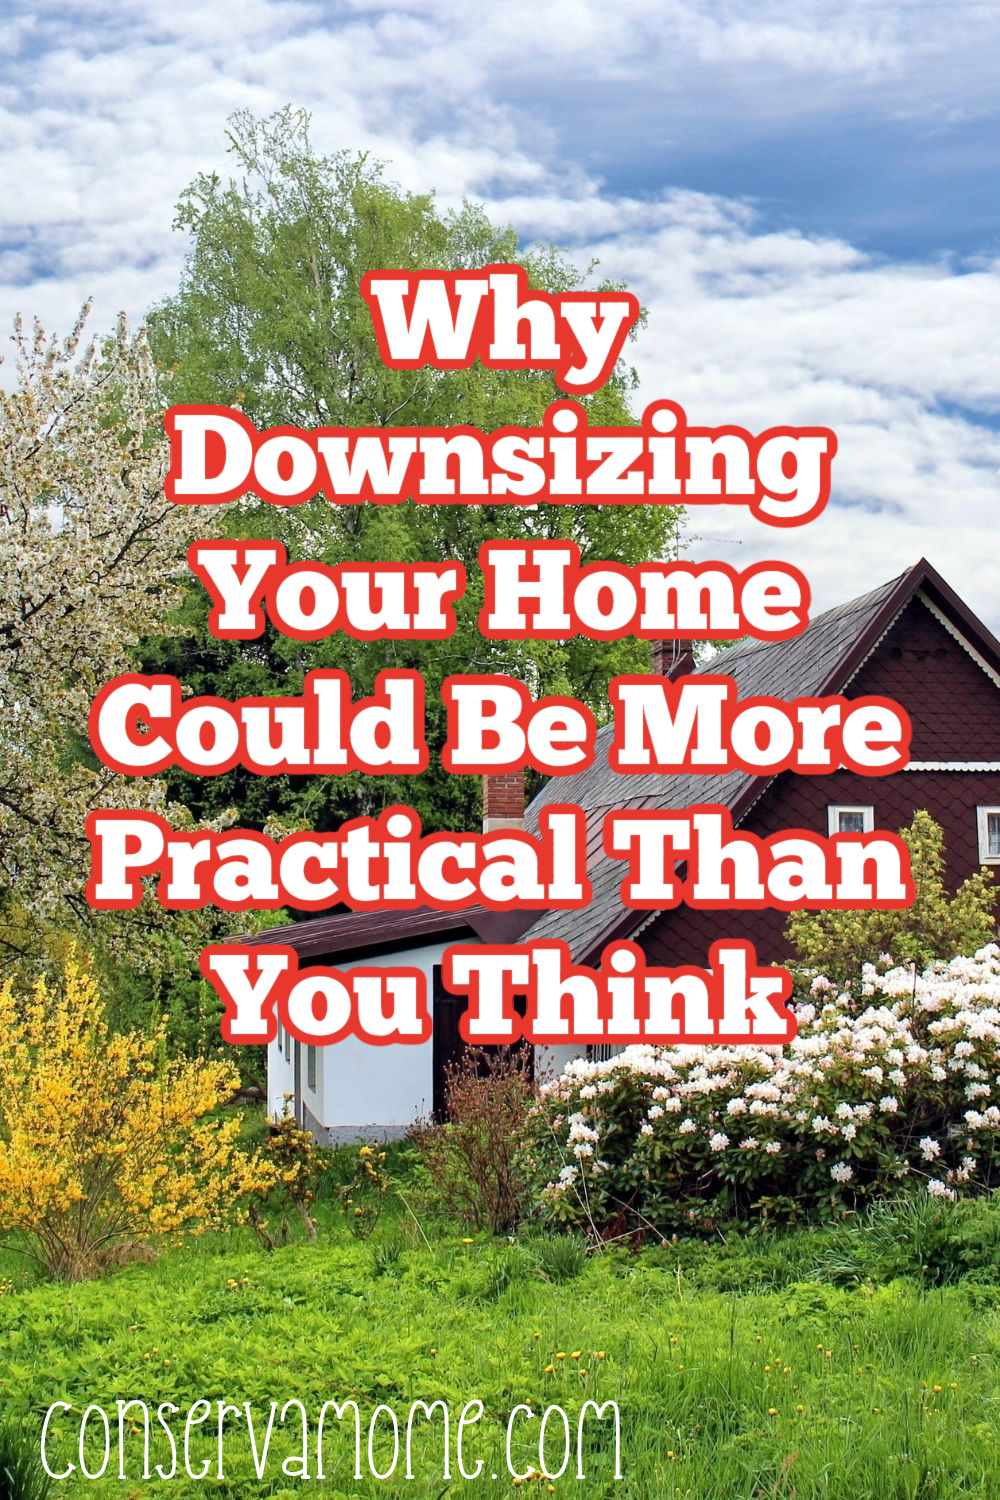 Why Downsizing Your Home Could Be More Practical Than You Think